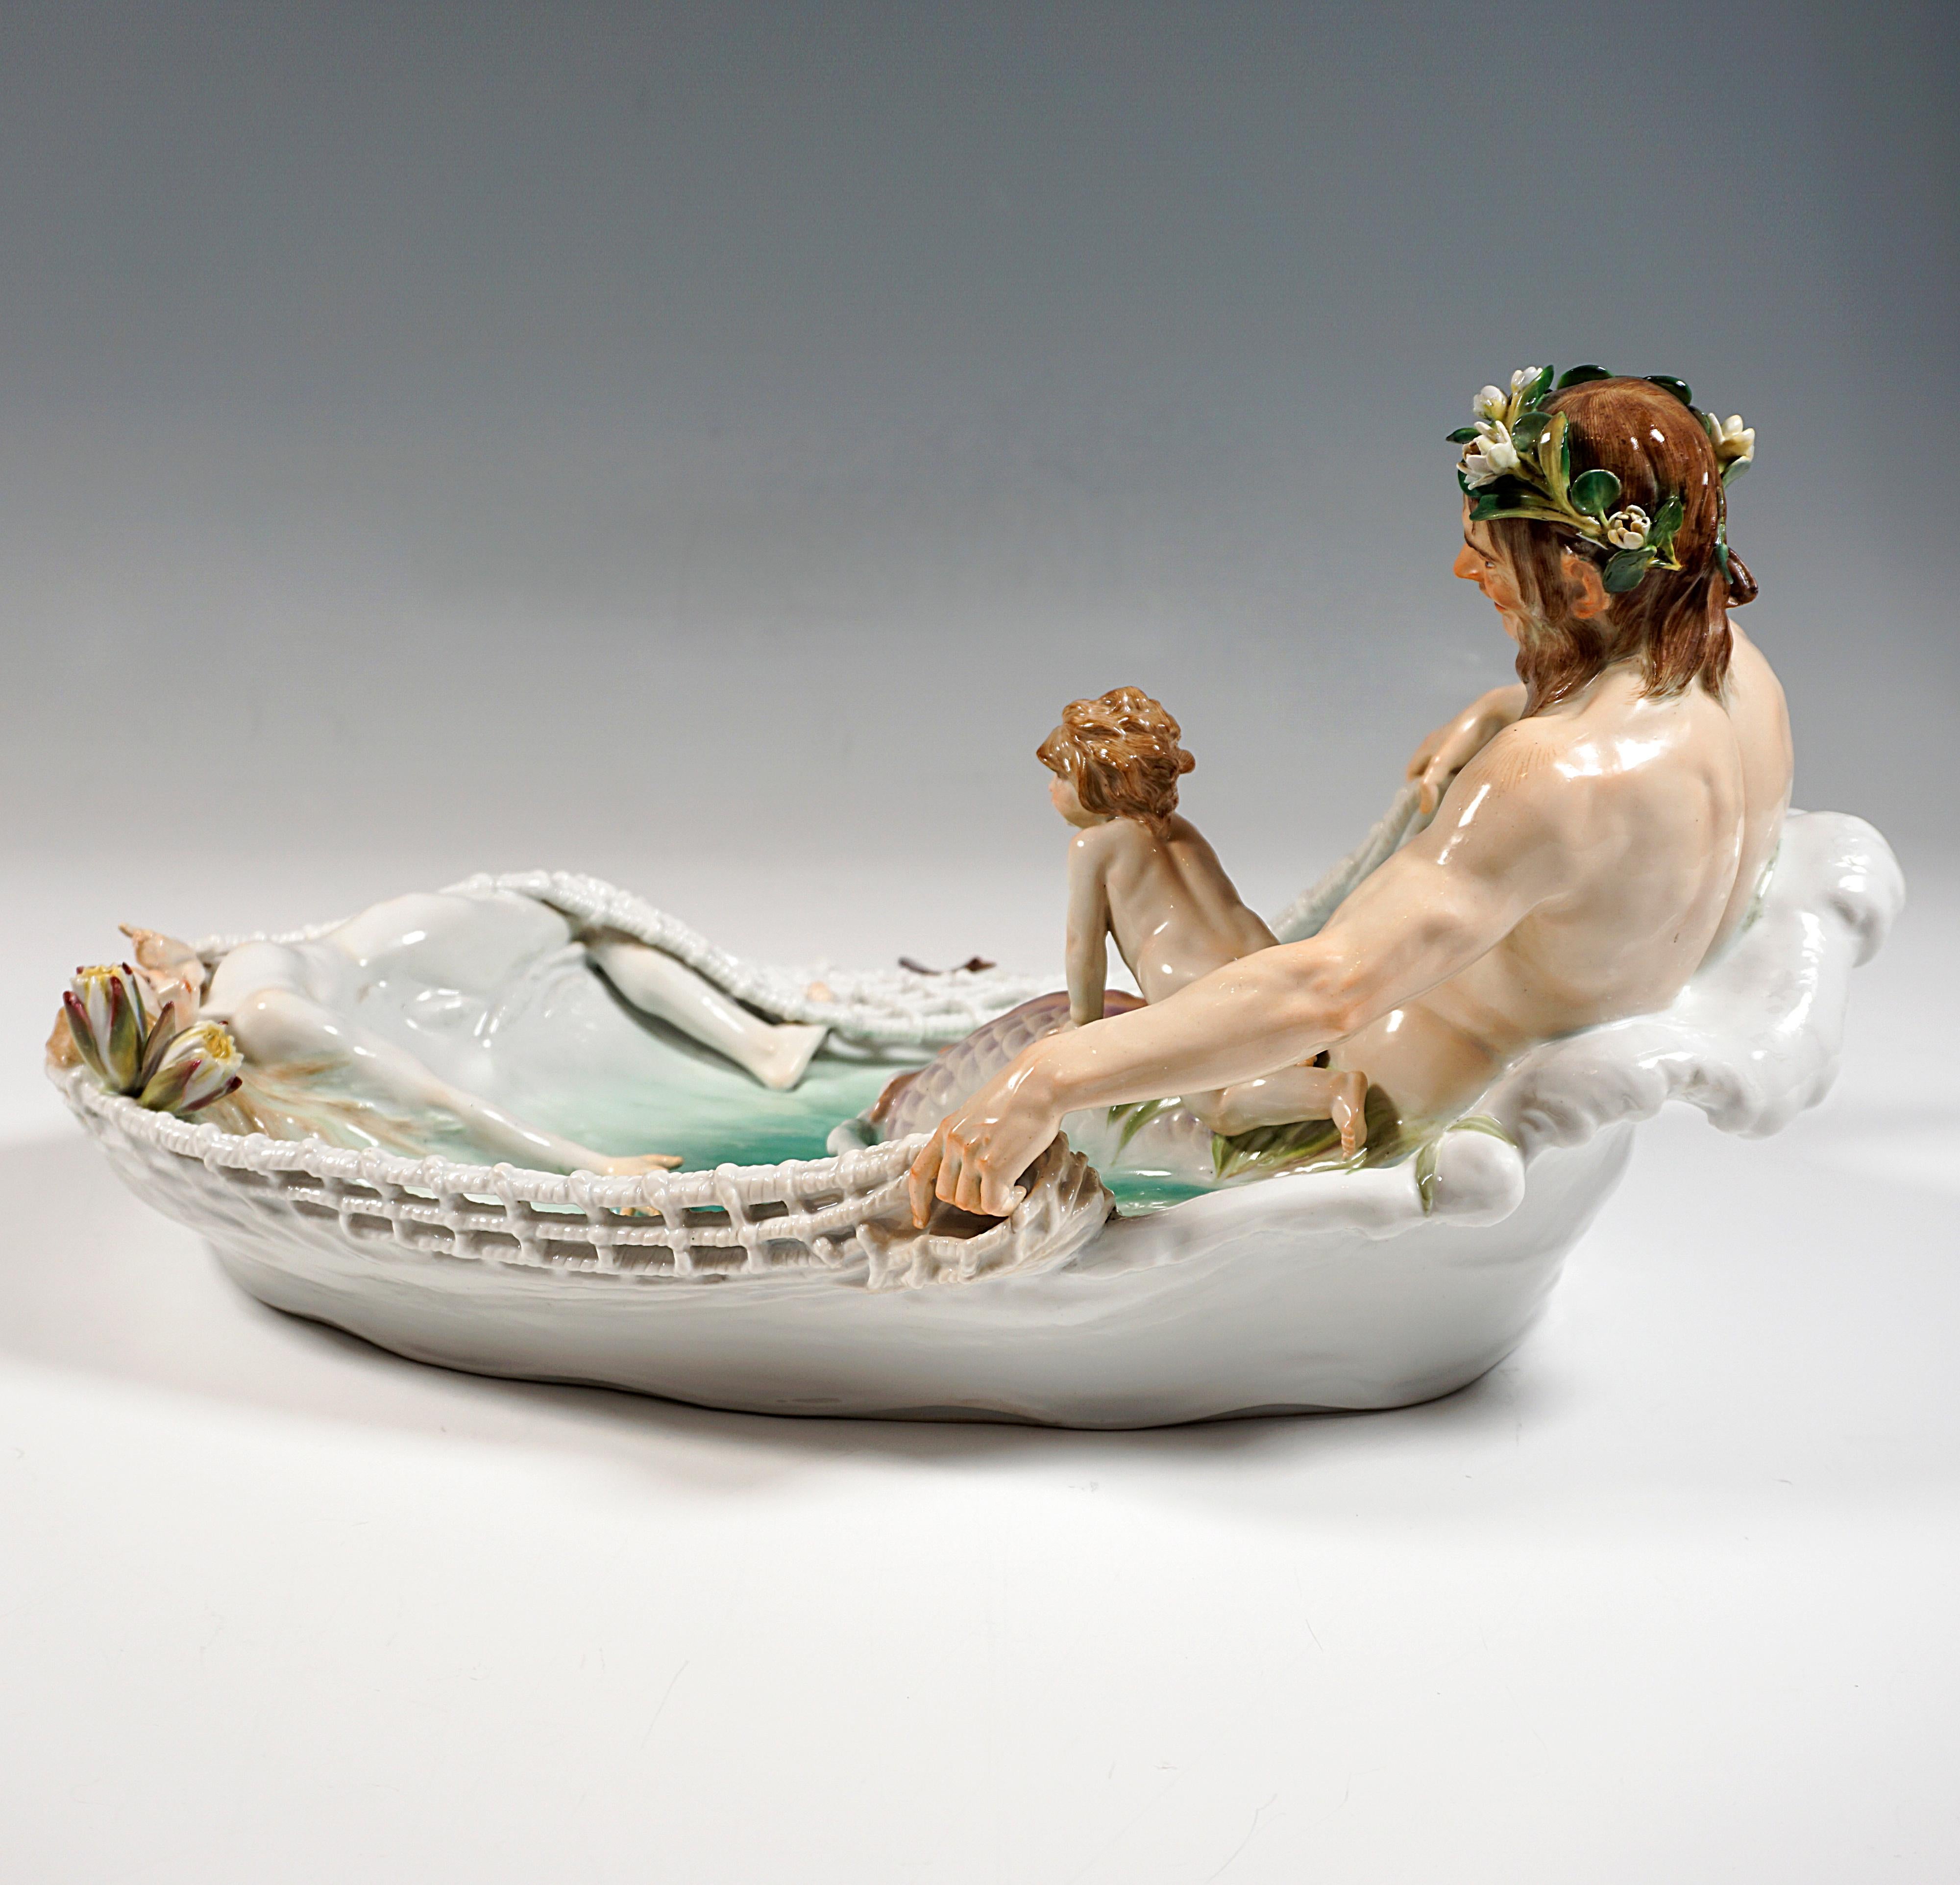 Art Nouveau Group 'Capture Of A Nymph', by Paul Helmig, Meissen Germany, Ca 1902 In Good Condition For Sale In Vienna, AT